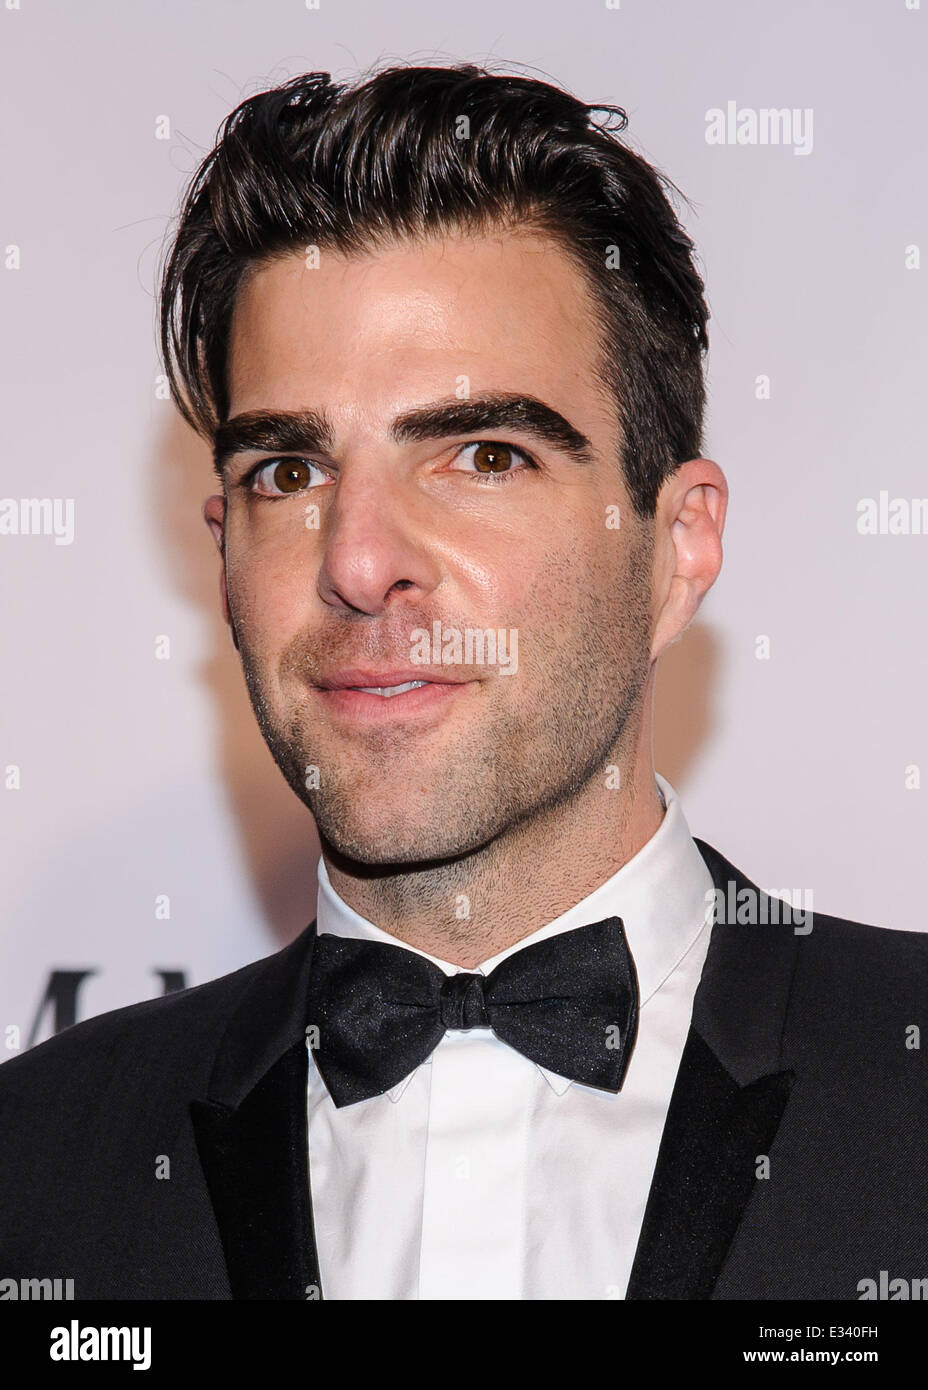 The Th Annual Tony Awards Held At Radio City Music Hall Arrivals Featuring Zachary Quinto